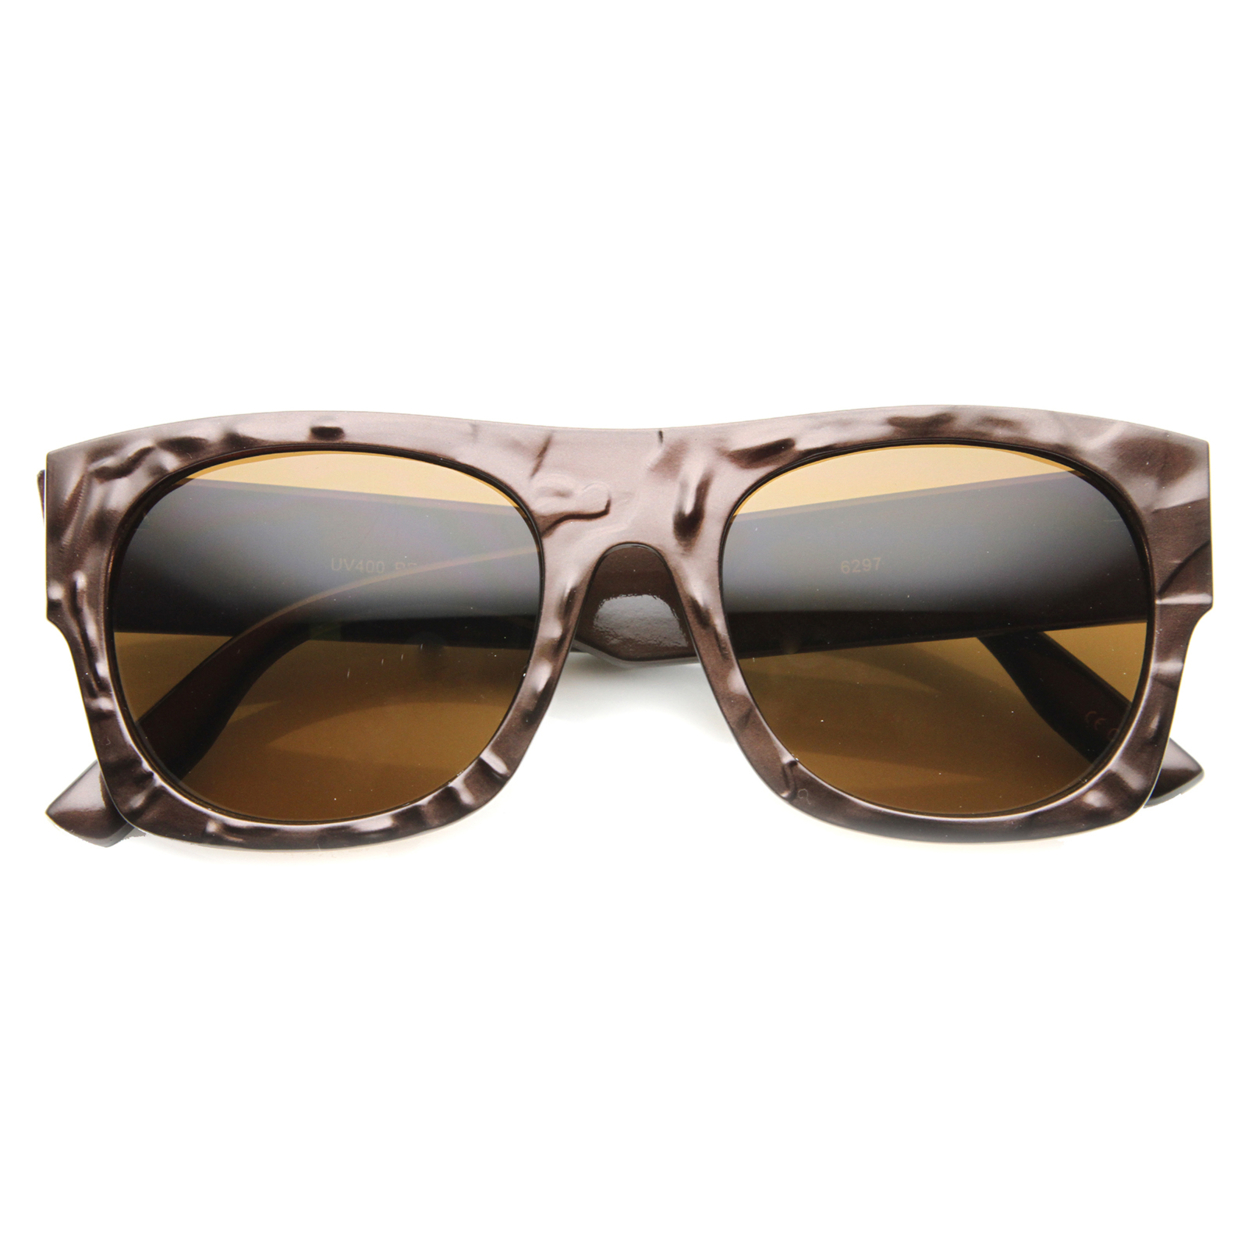 Unisex Rectangular Sunglasses With UV400 Protected Composite Lens 9865 - Shiny Brown / Brown